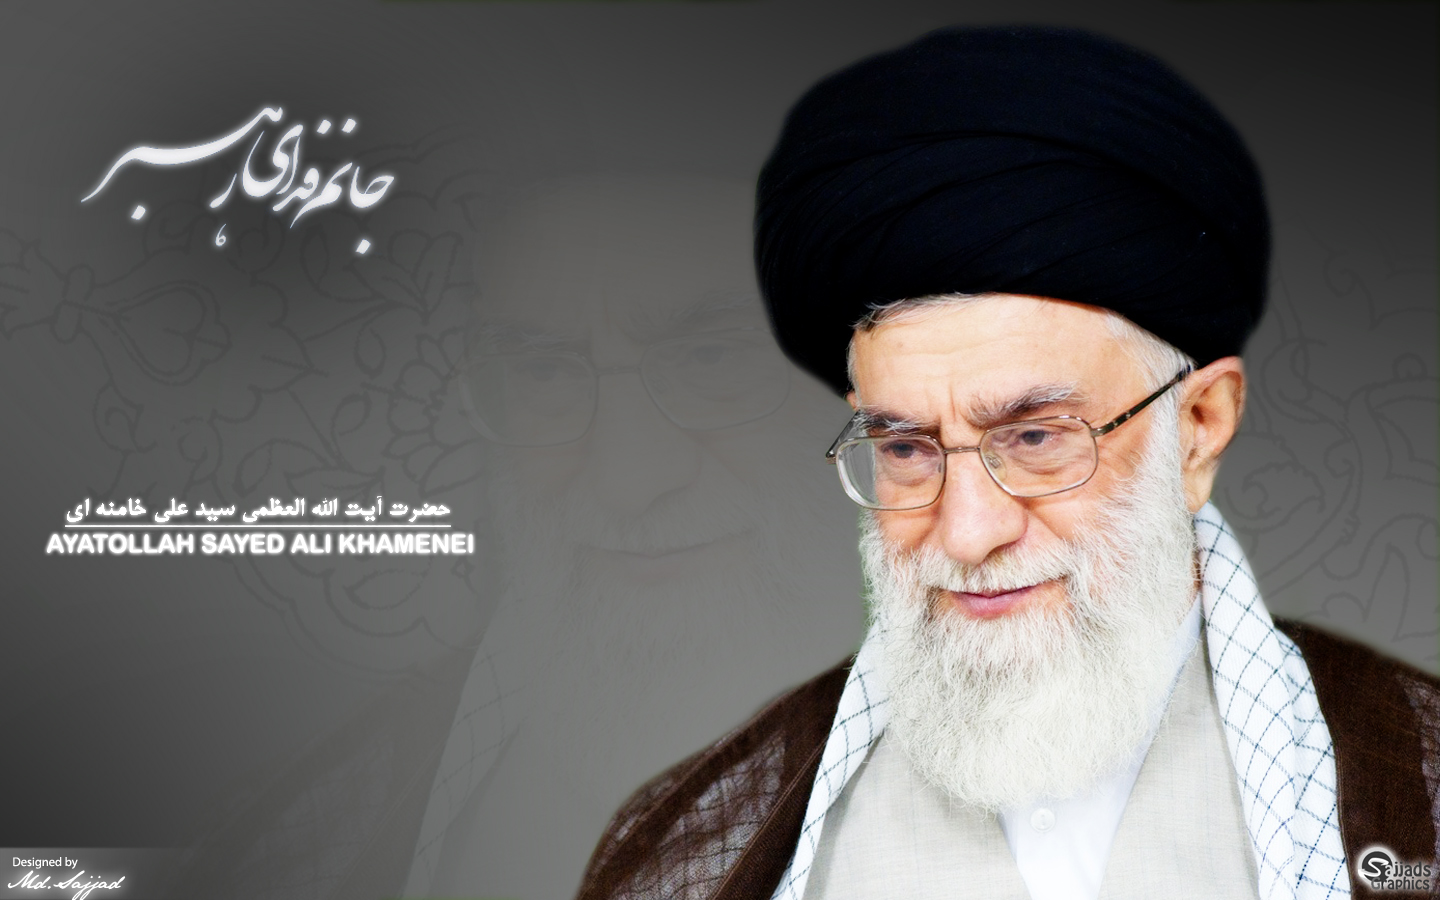 Iran's Supreme Leader Takes to Publishing, Social Media - Publishing  Perspectives